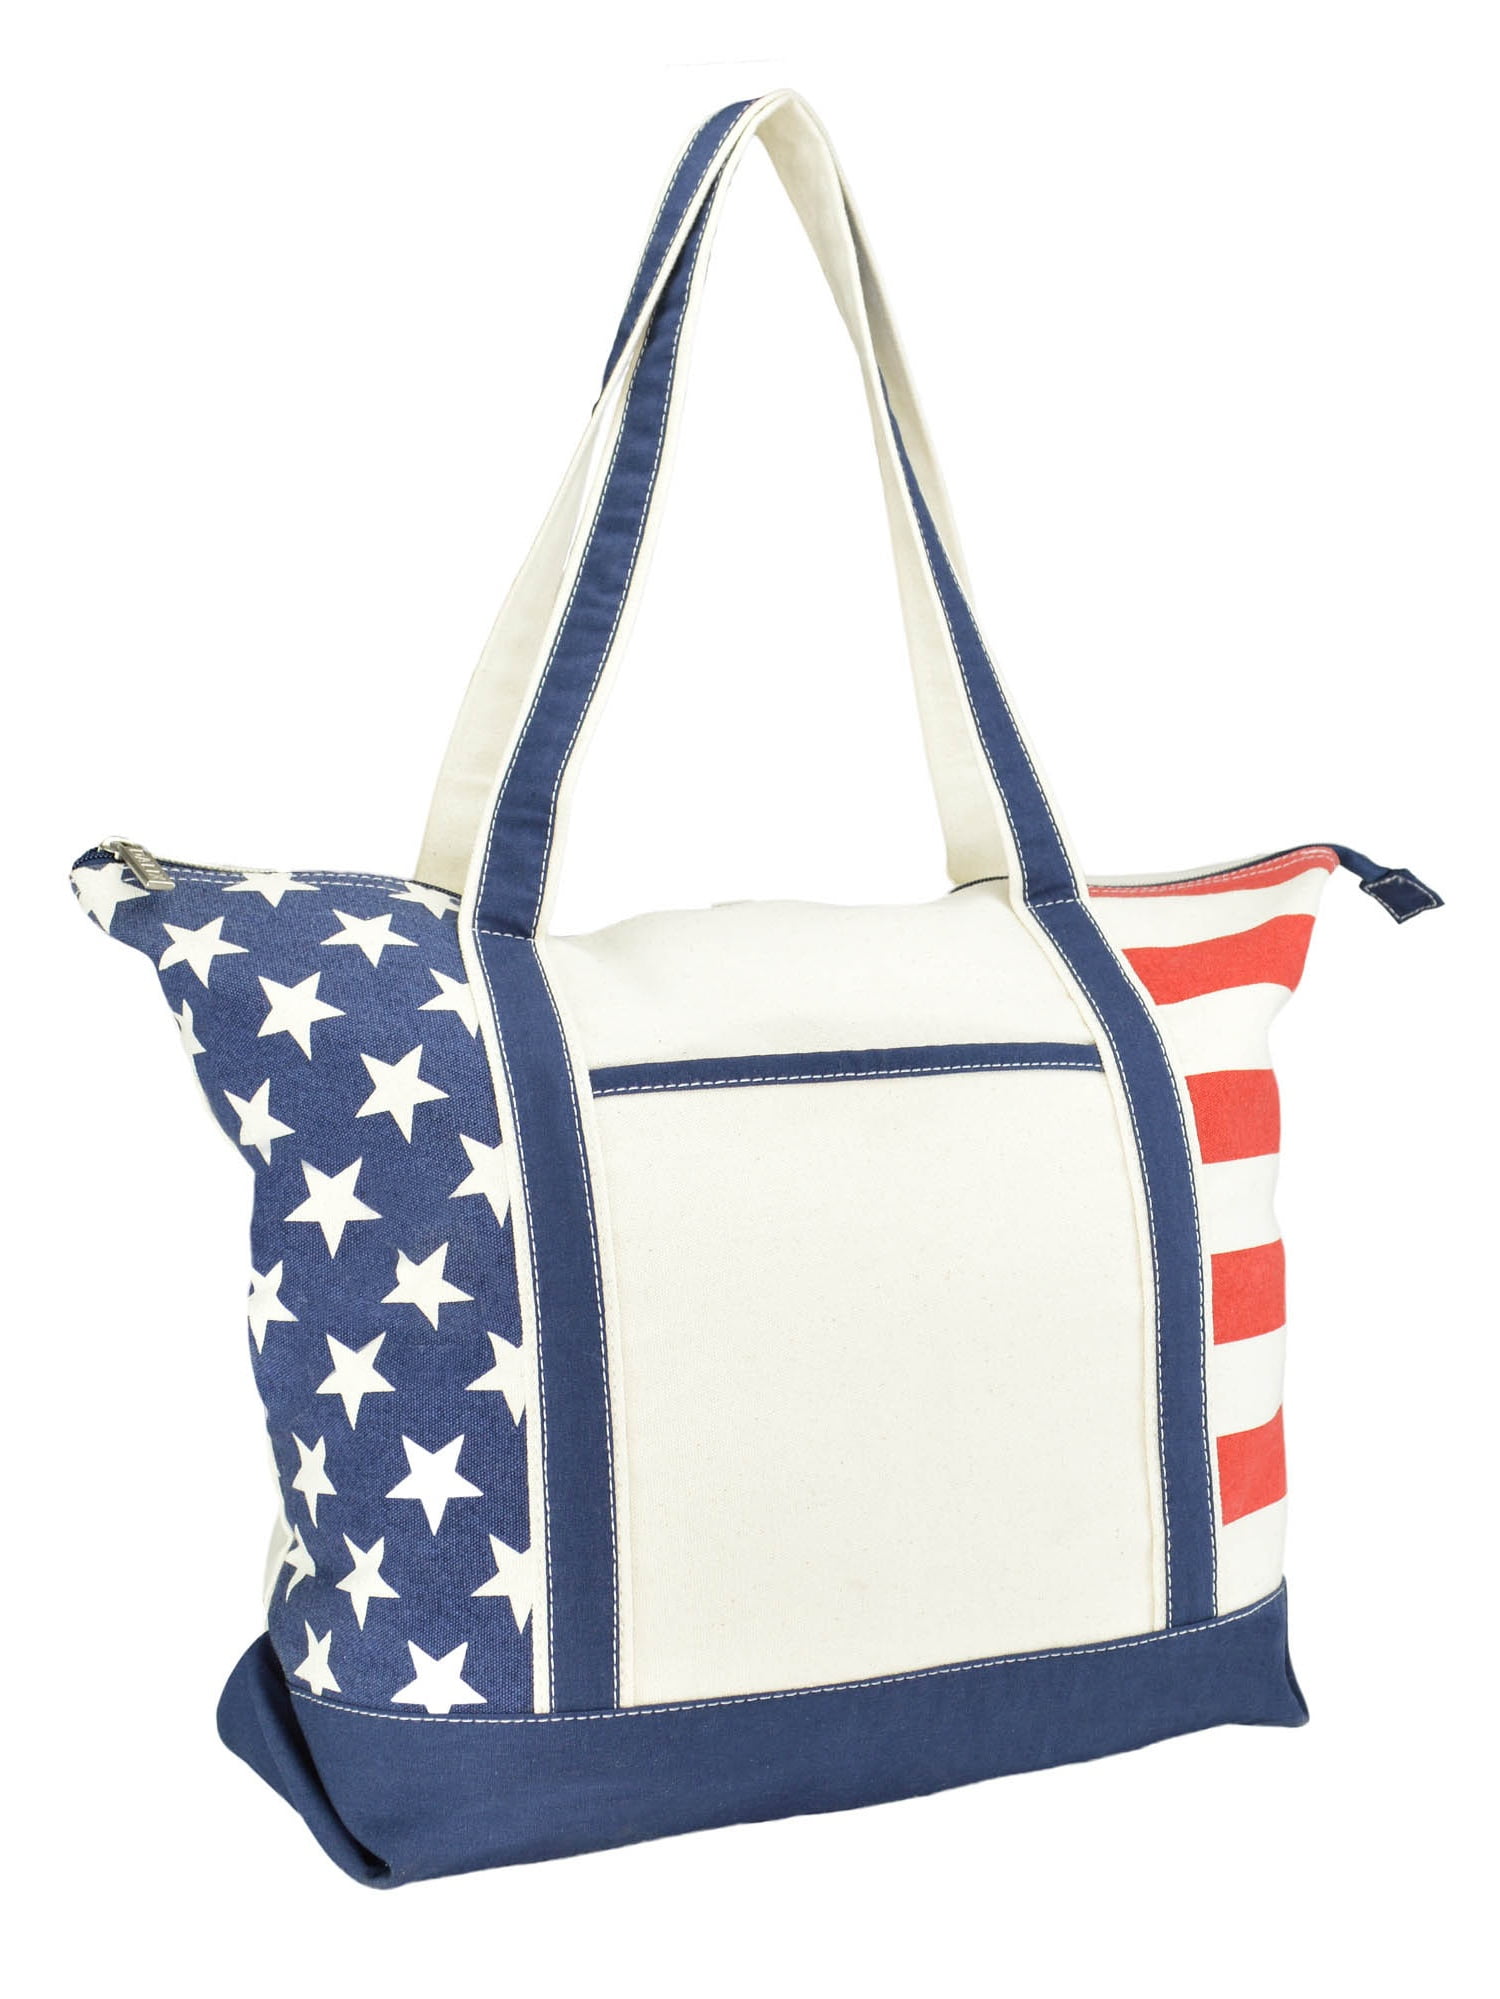 July 4th Personalized Large America Flag Designed Woven Handles Jute TOTE Bag 